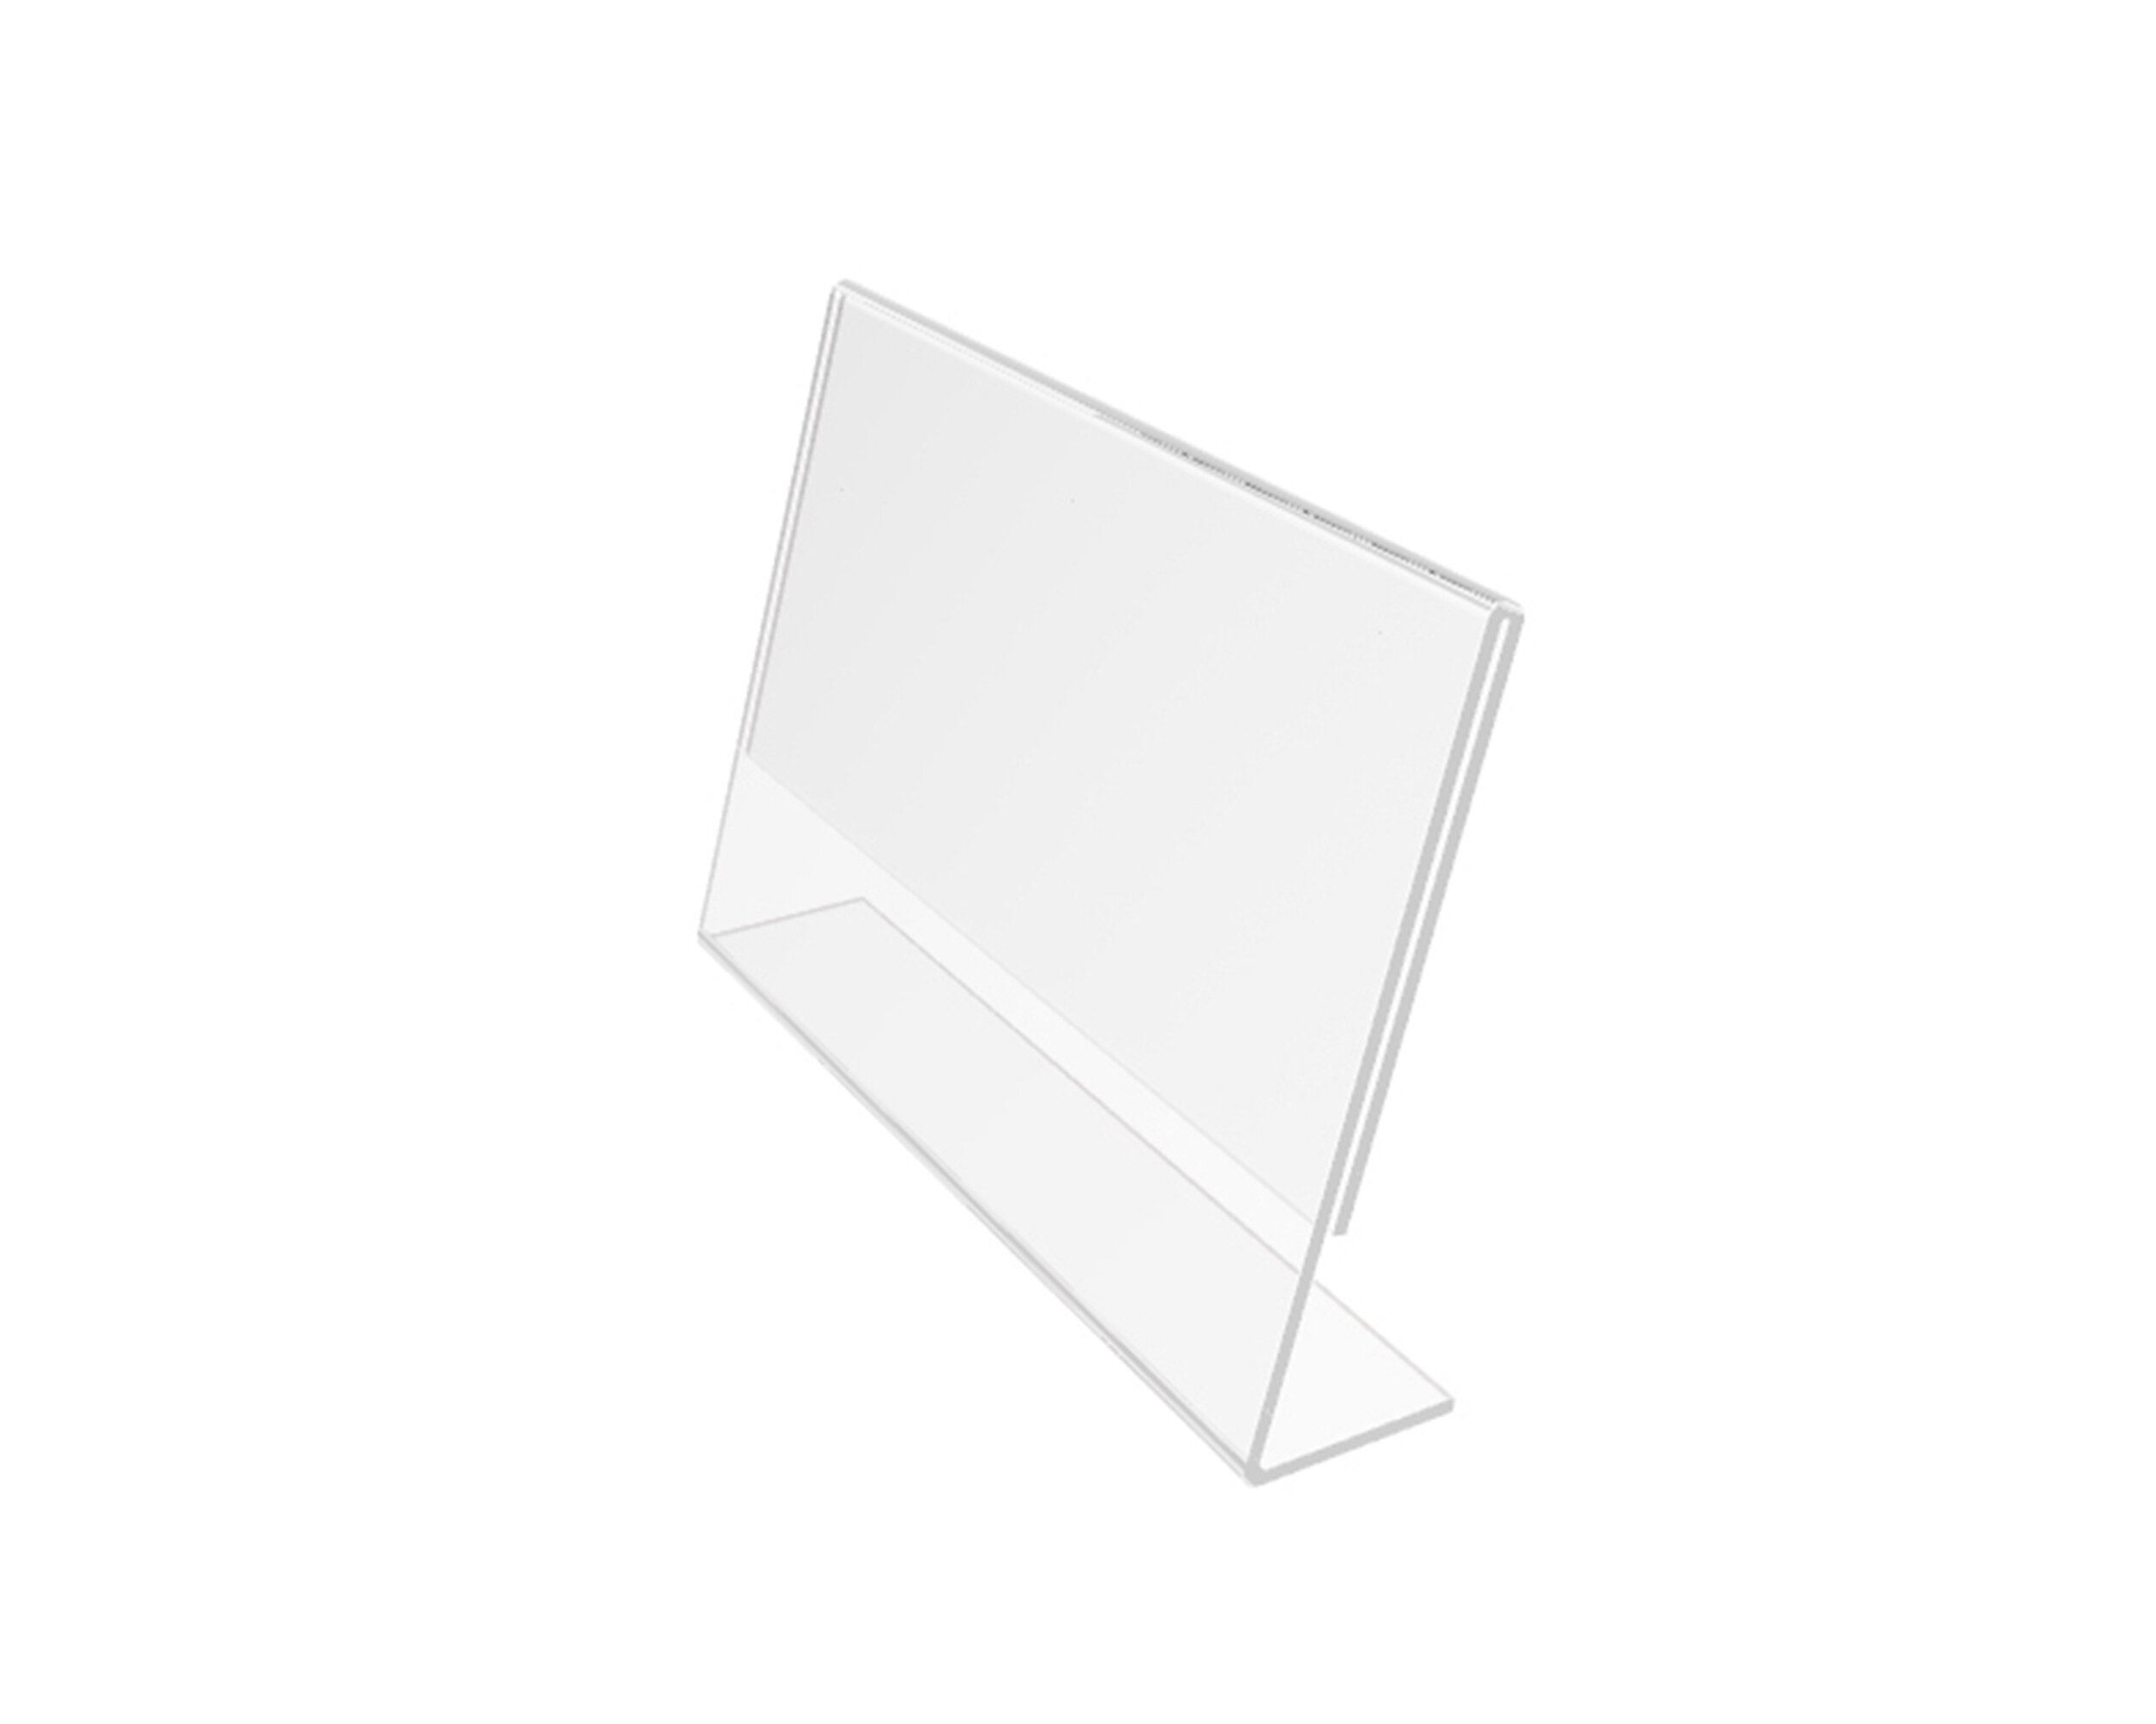 Slant Back Acrylic Sign Holder 5x7 - Clear Picture Frame Stand, 5 x 7